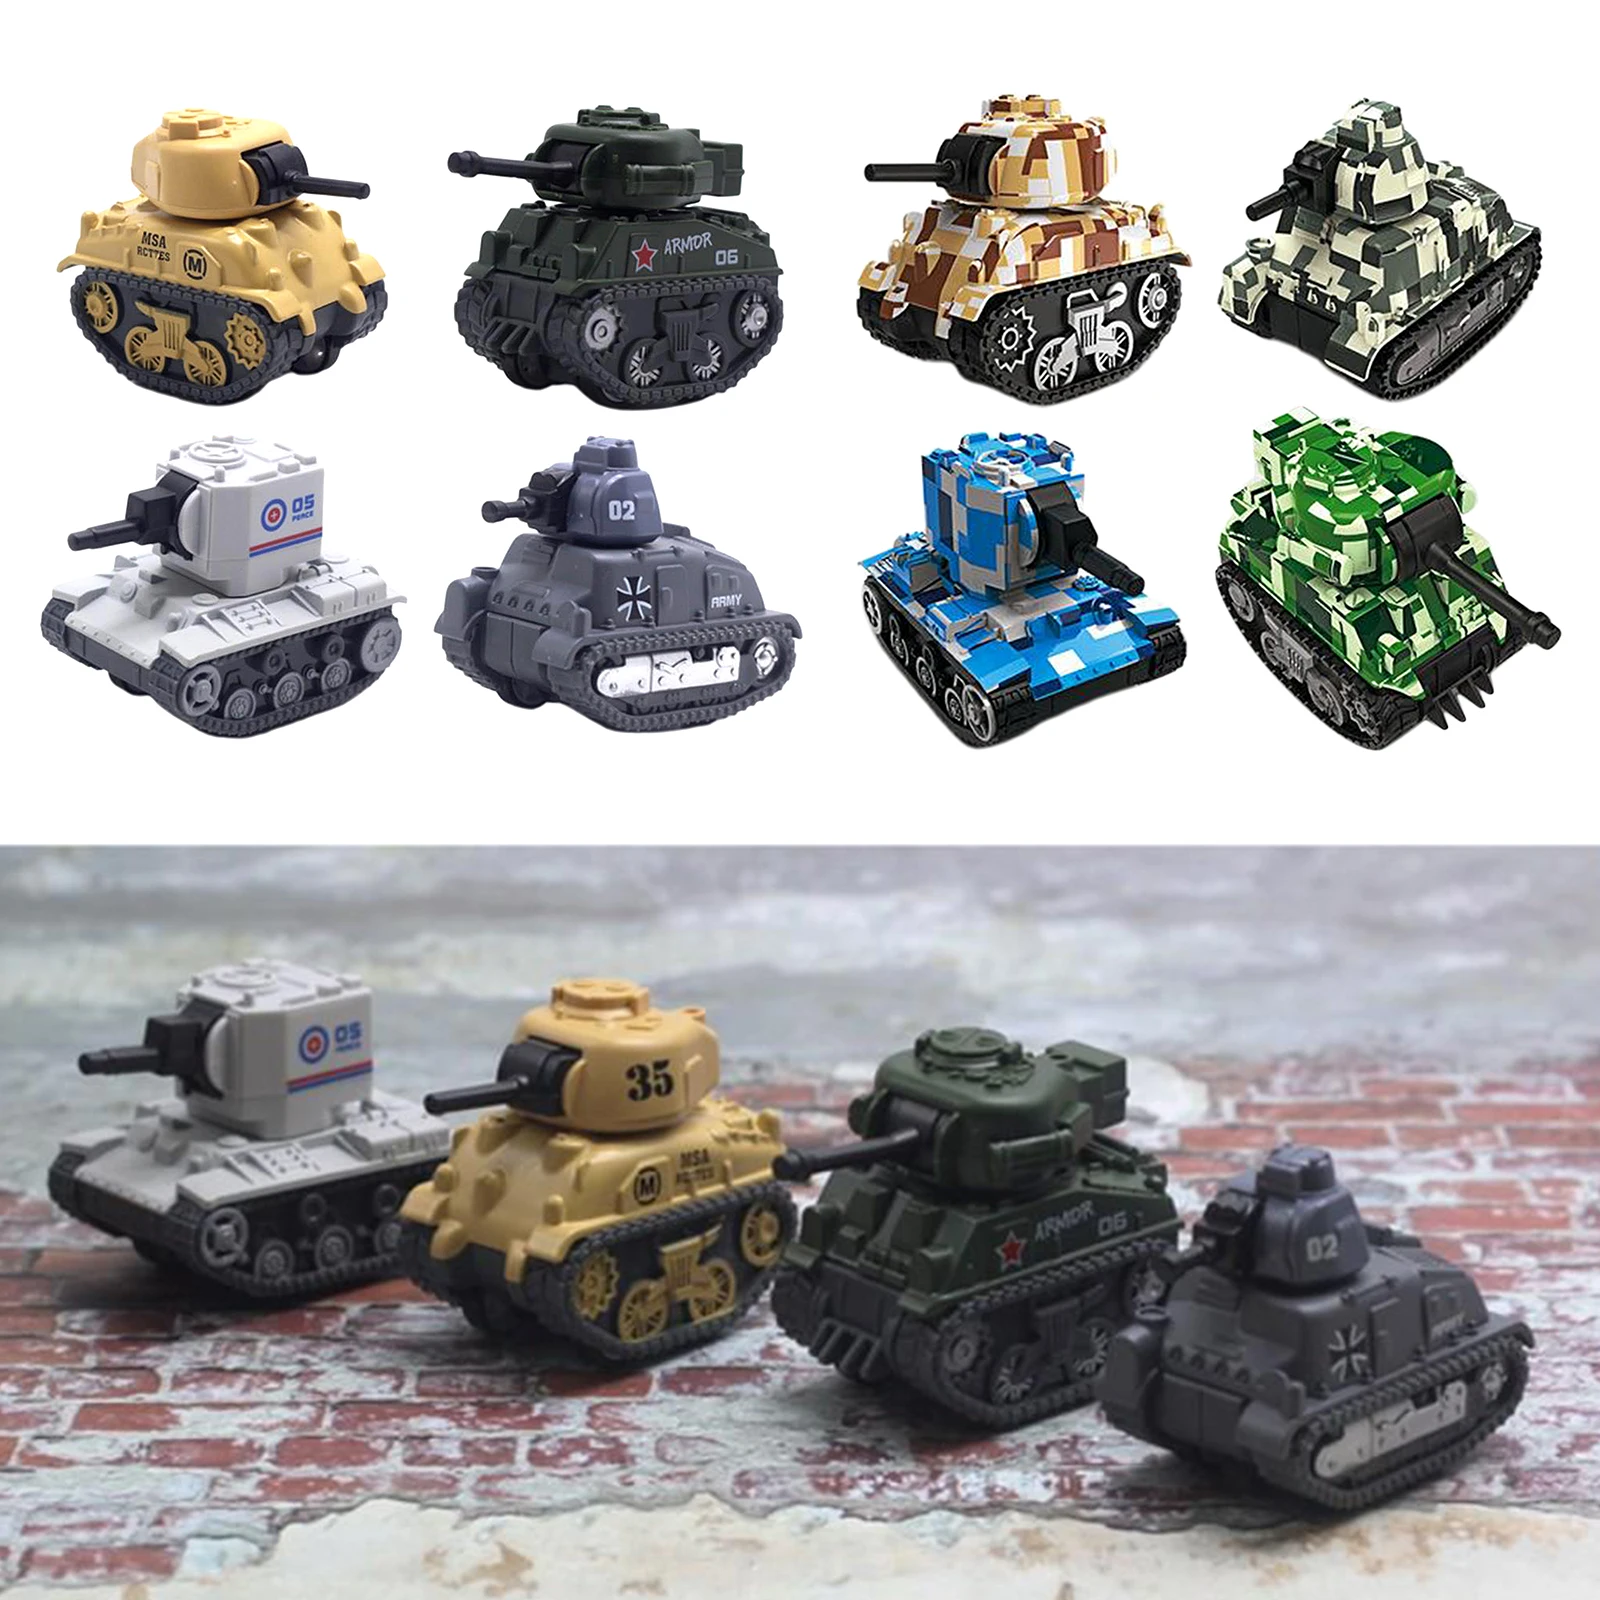 4-pack Simulation Tank Toys Kids Educational Toy for Commemorate Collection Kid Adult Gifts